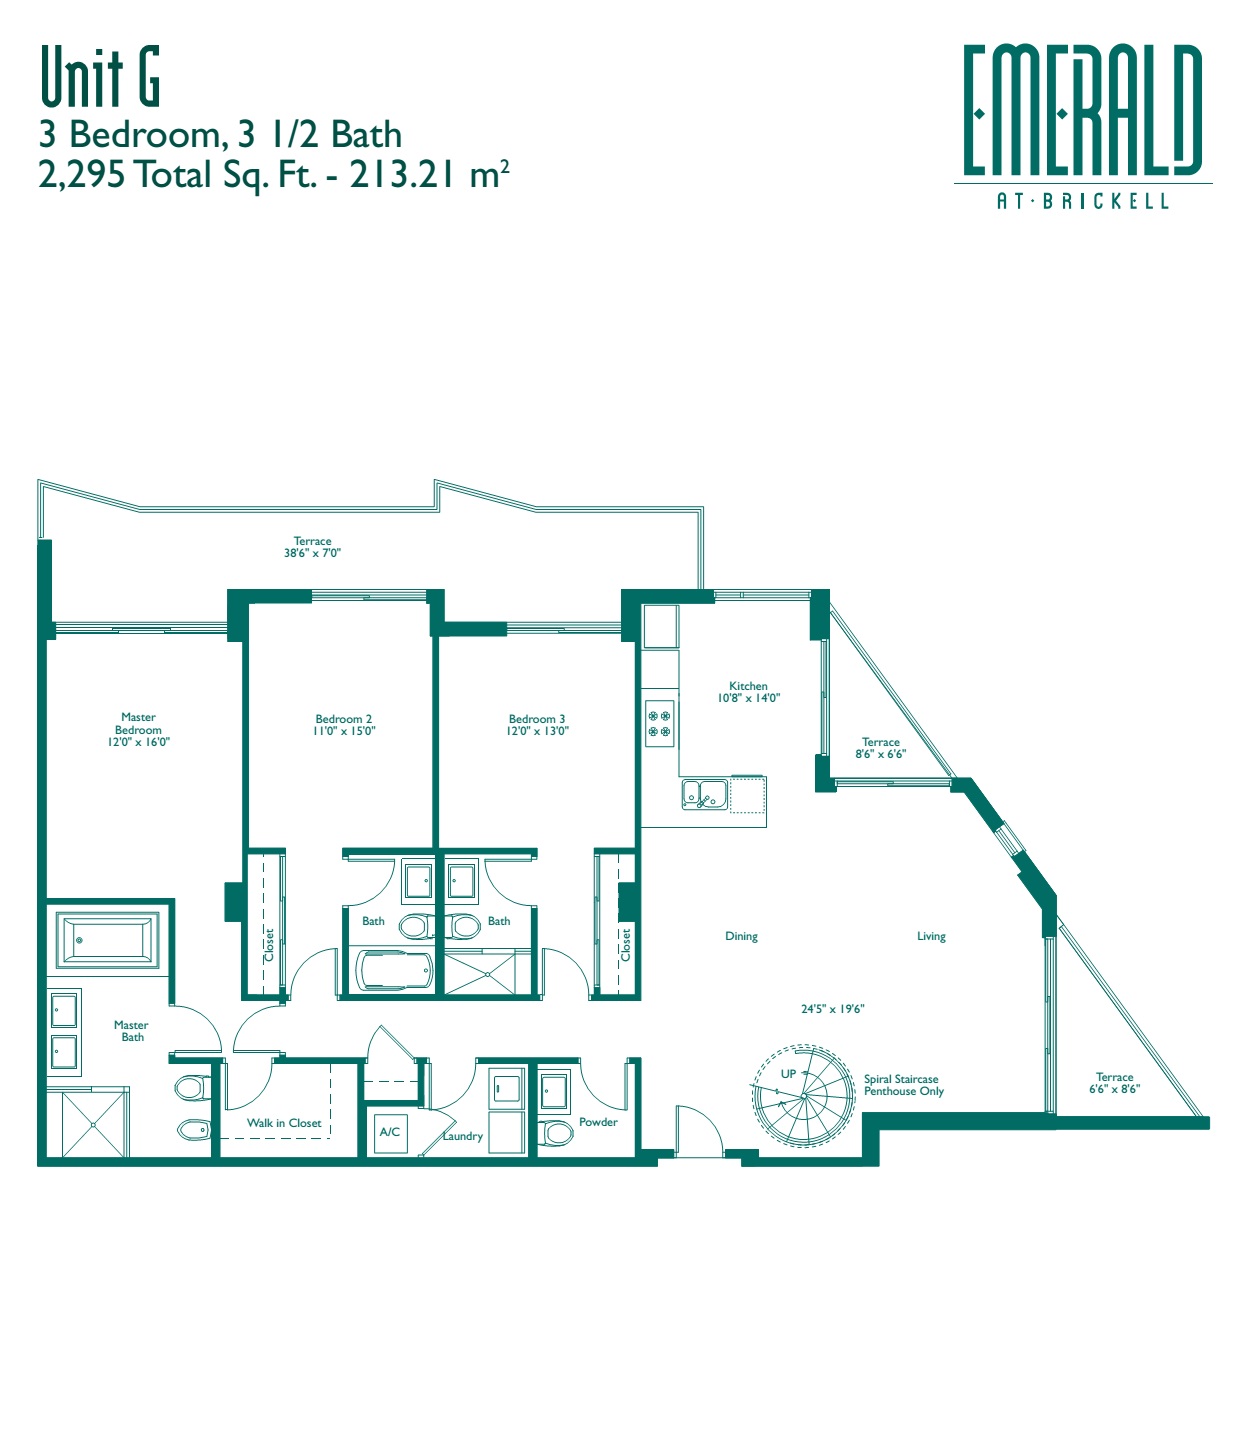 Emerald at Brickell Penthouse 02-G